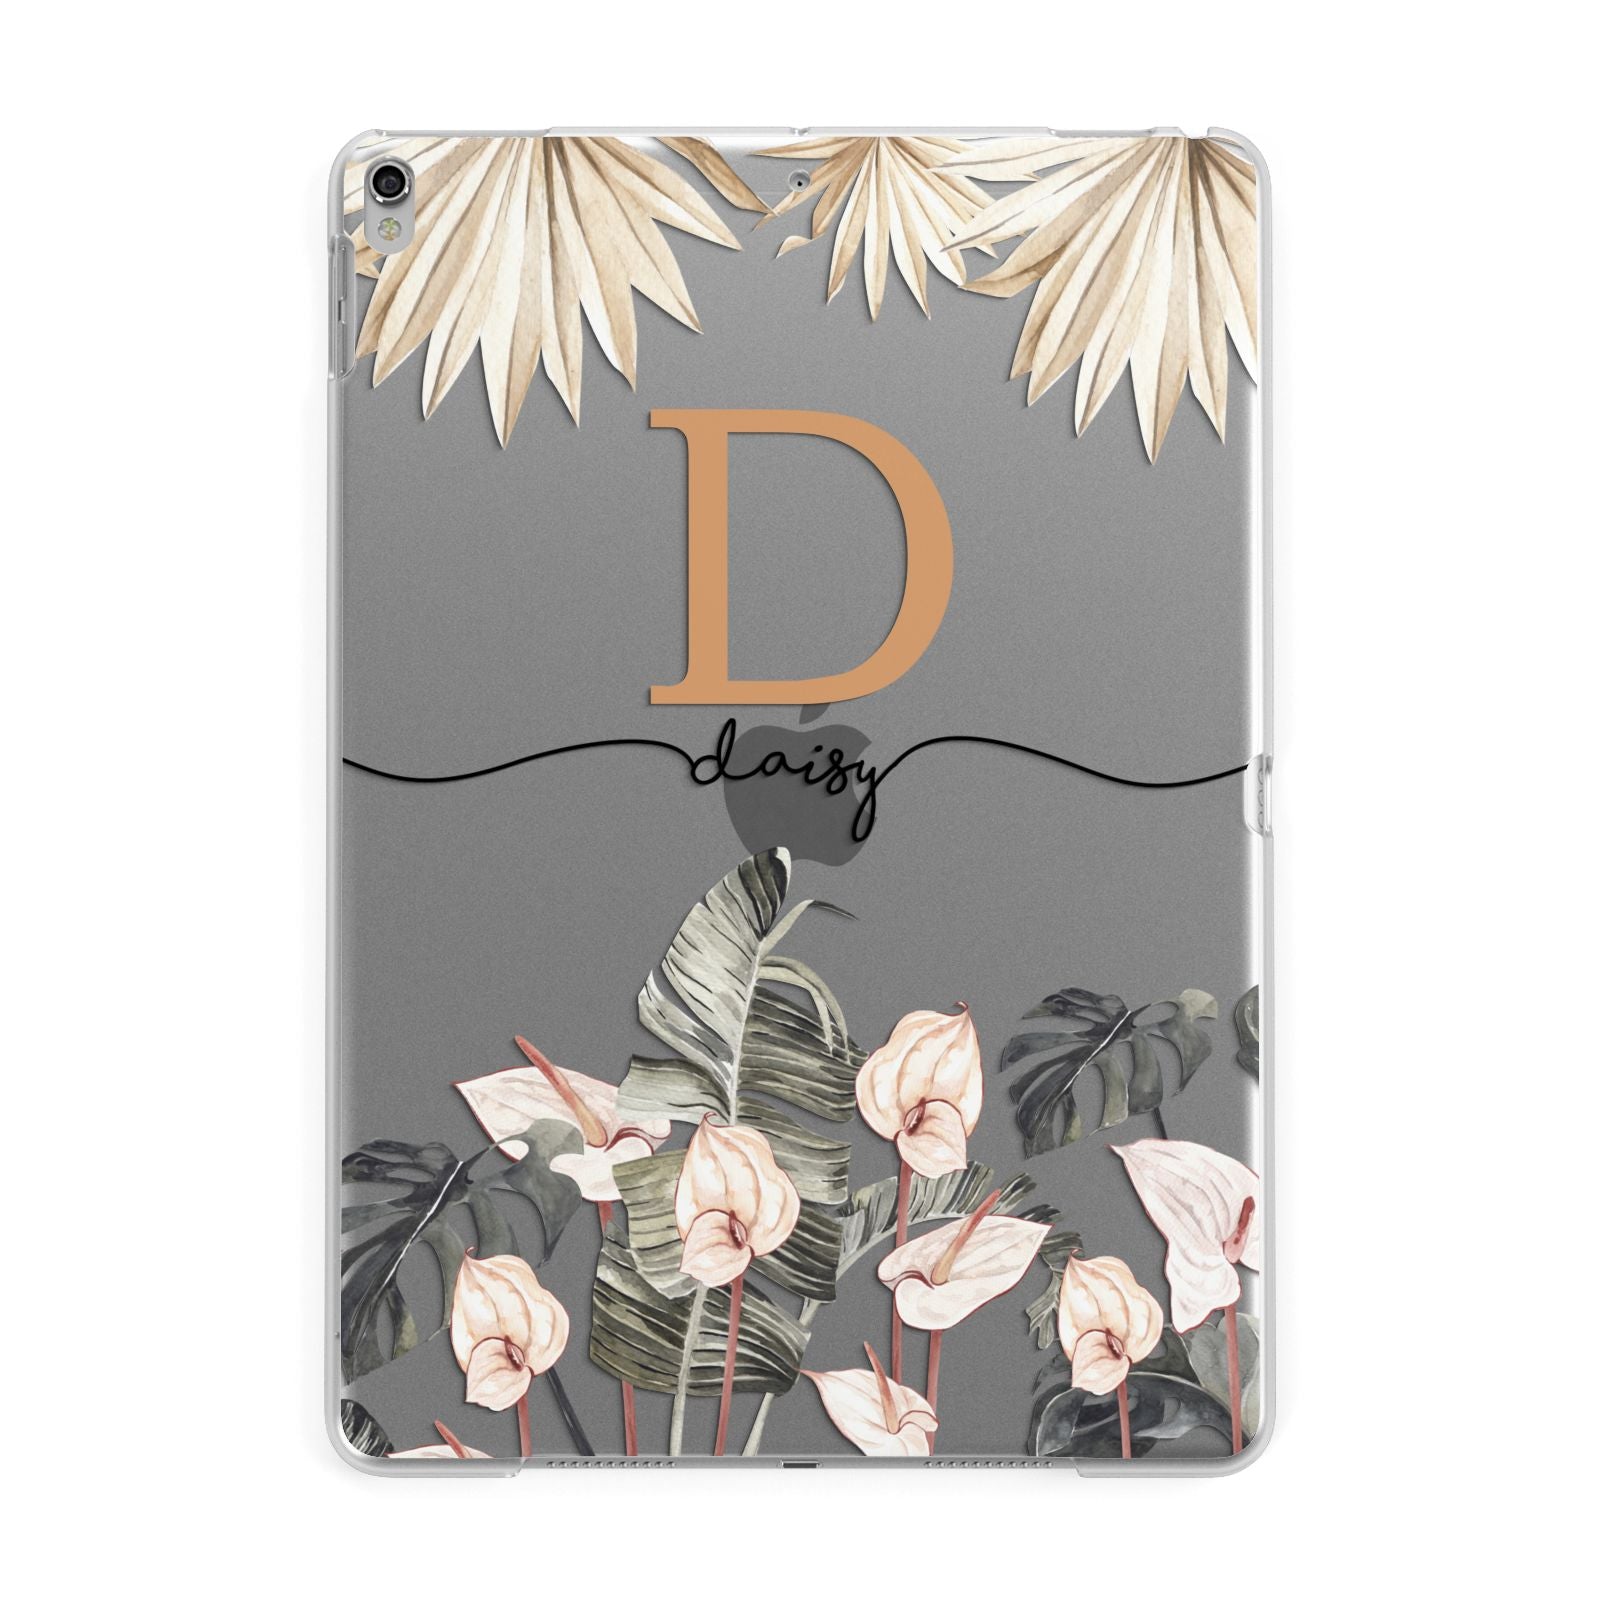 Personalised Dried Flowers Apple iPad Silver Case